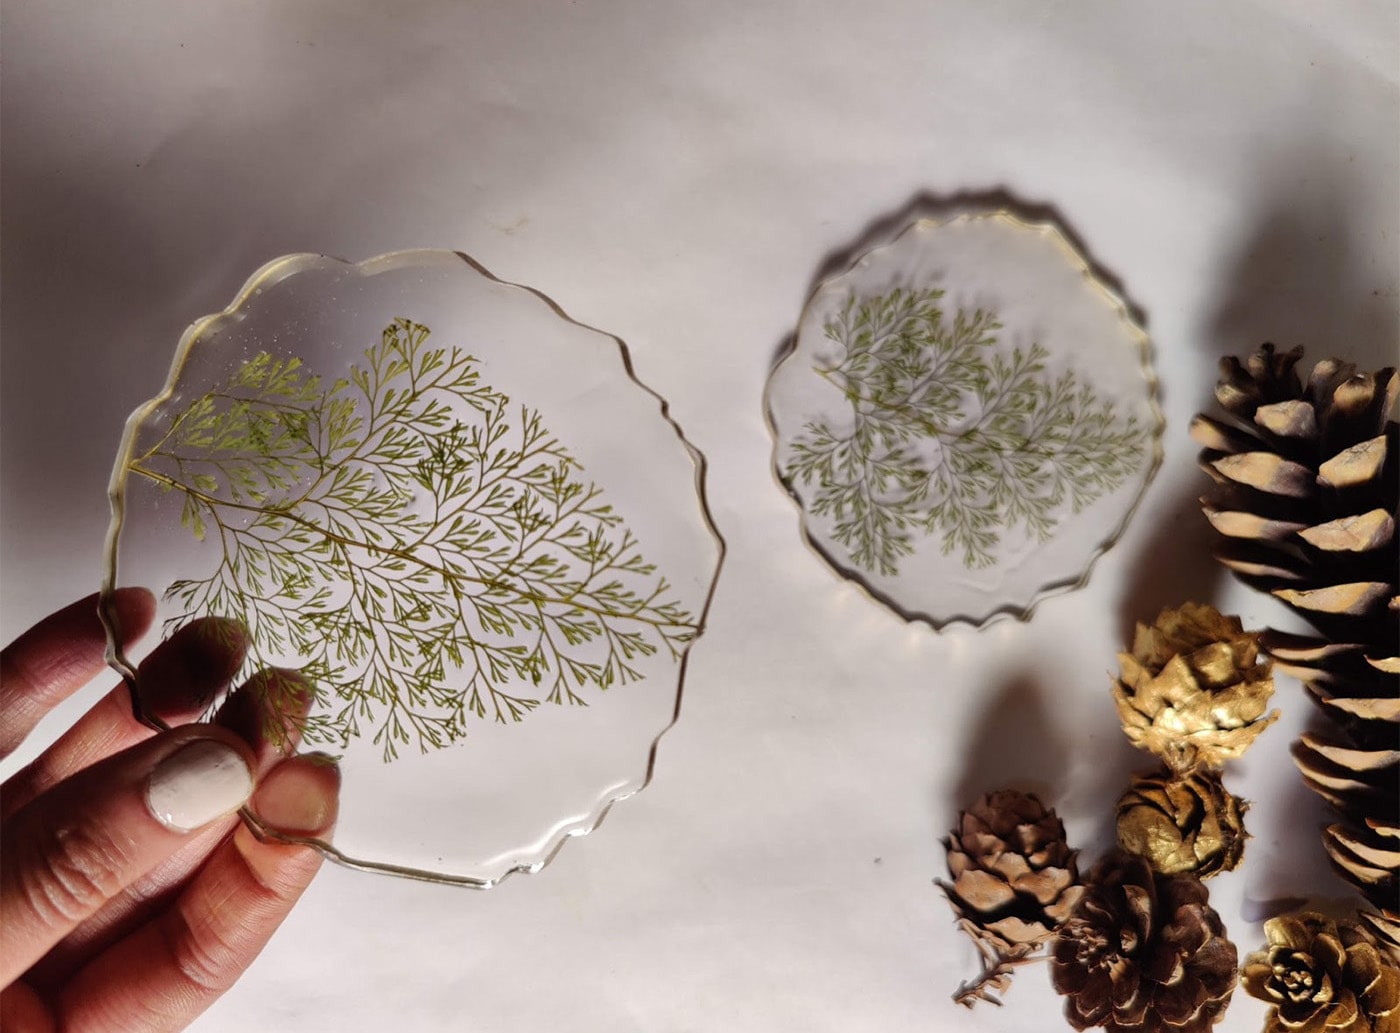 Fern leaf trapped in resin as a coaster. Pinecones on the table for decoration.